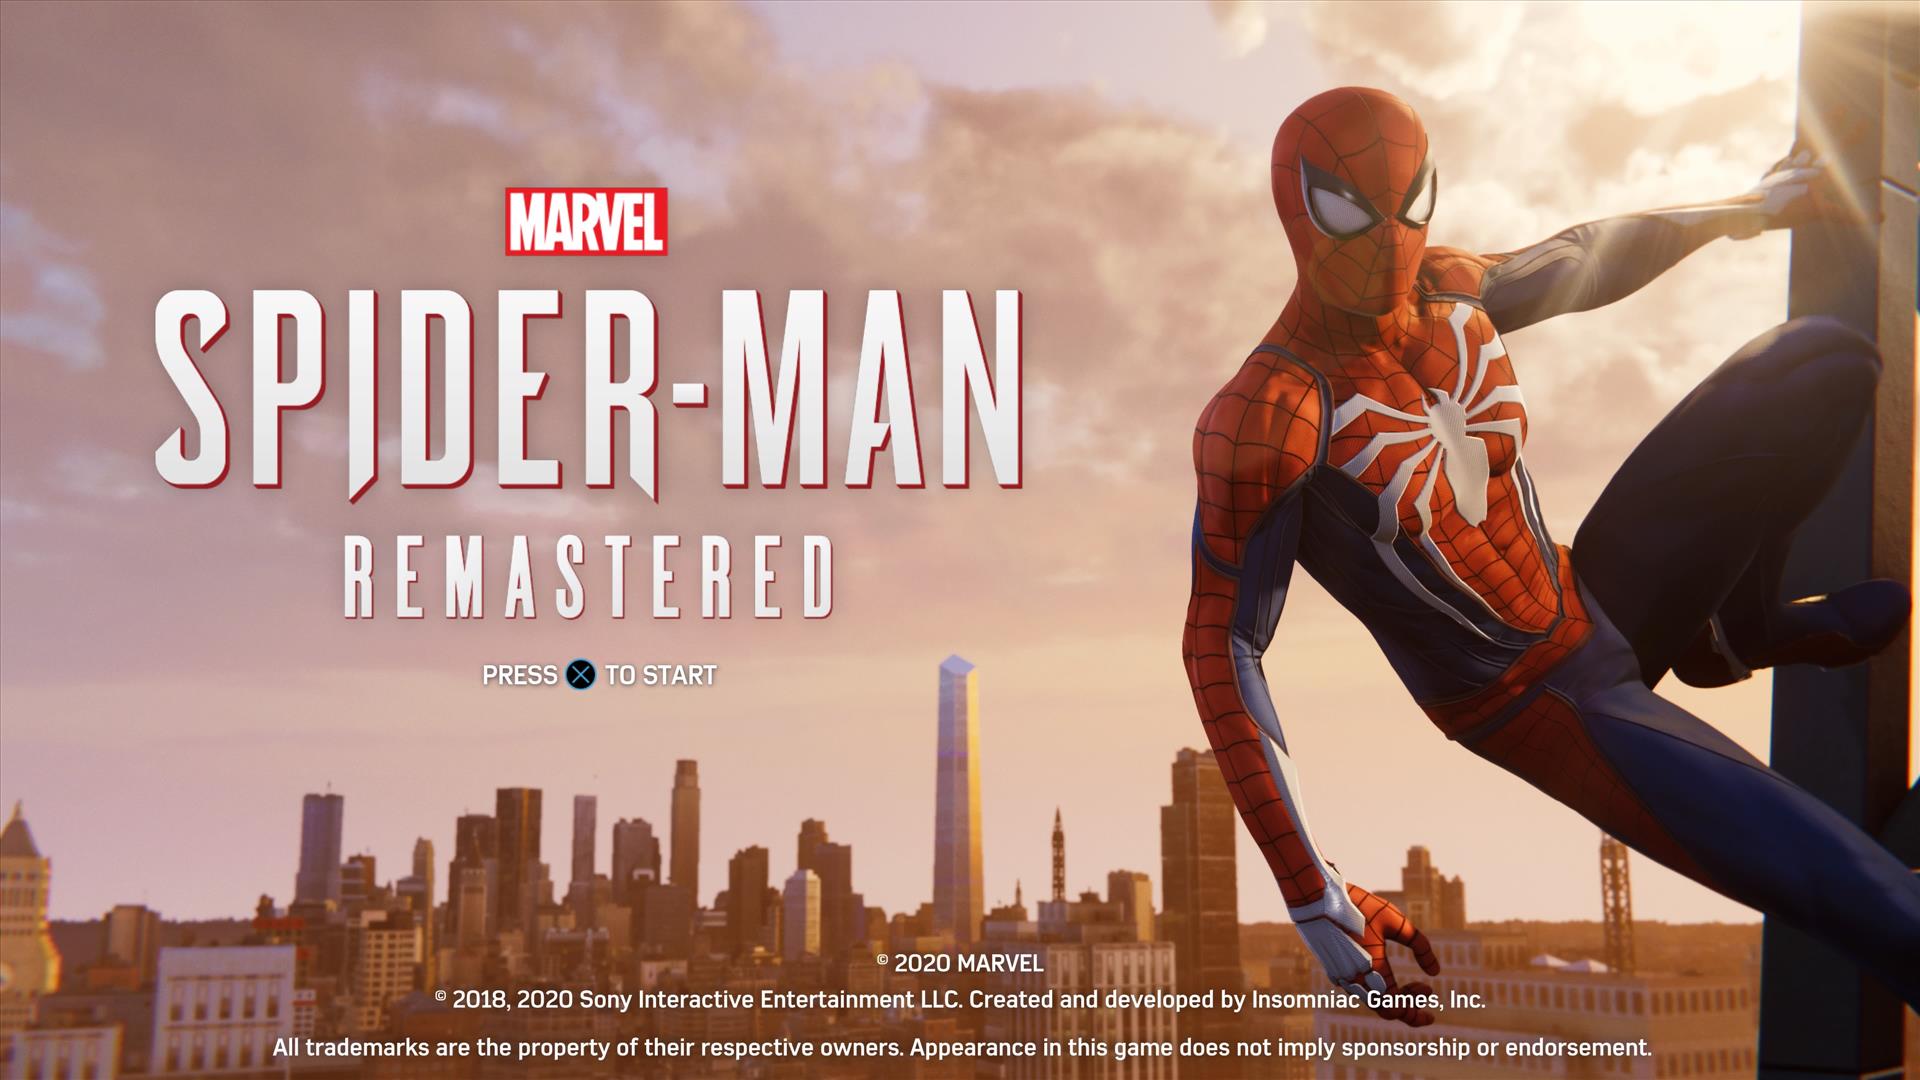 Marvel's Spider-Man: Miles Morales Ultimate Edition Review - Gaming Nexus